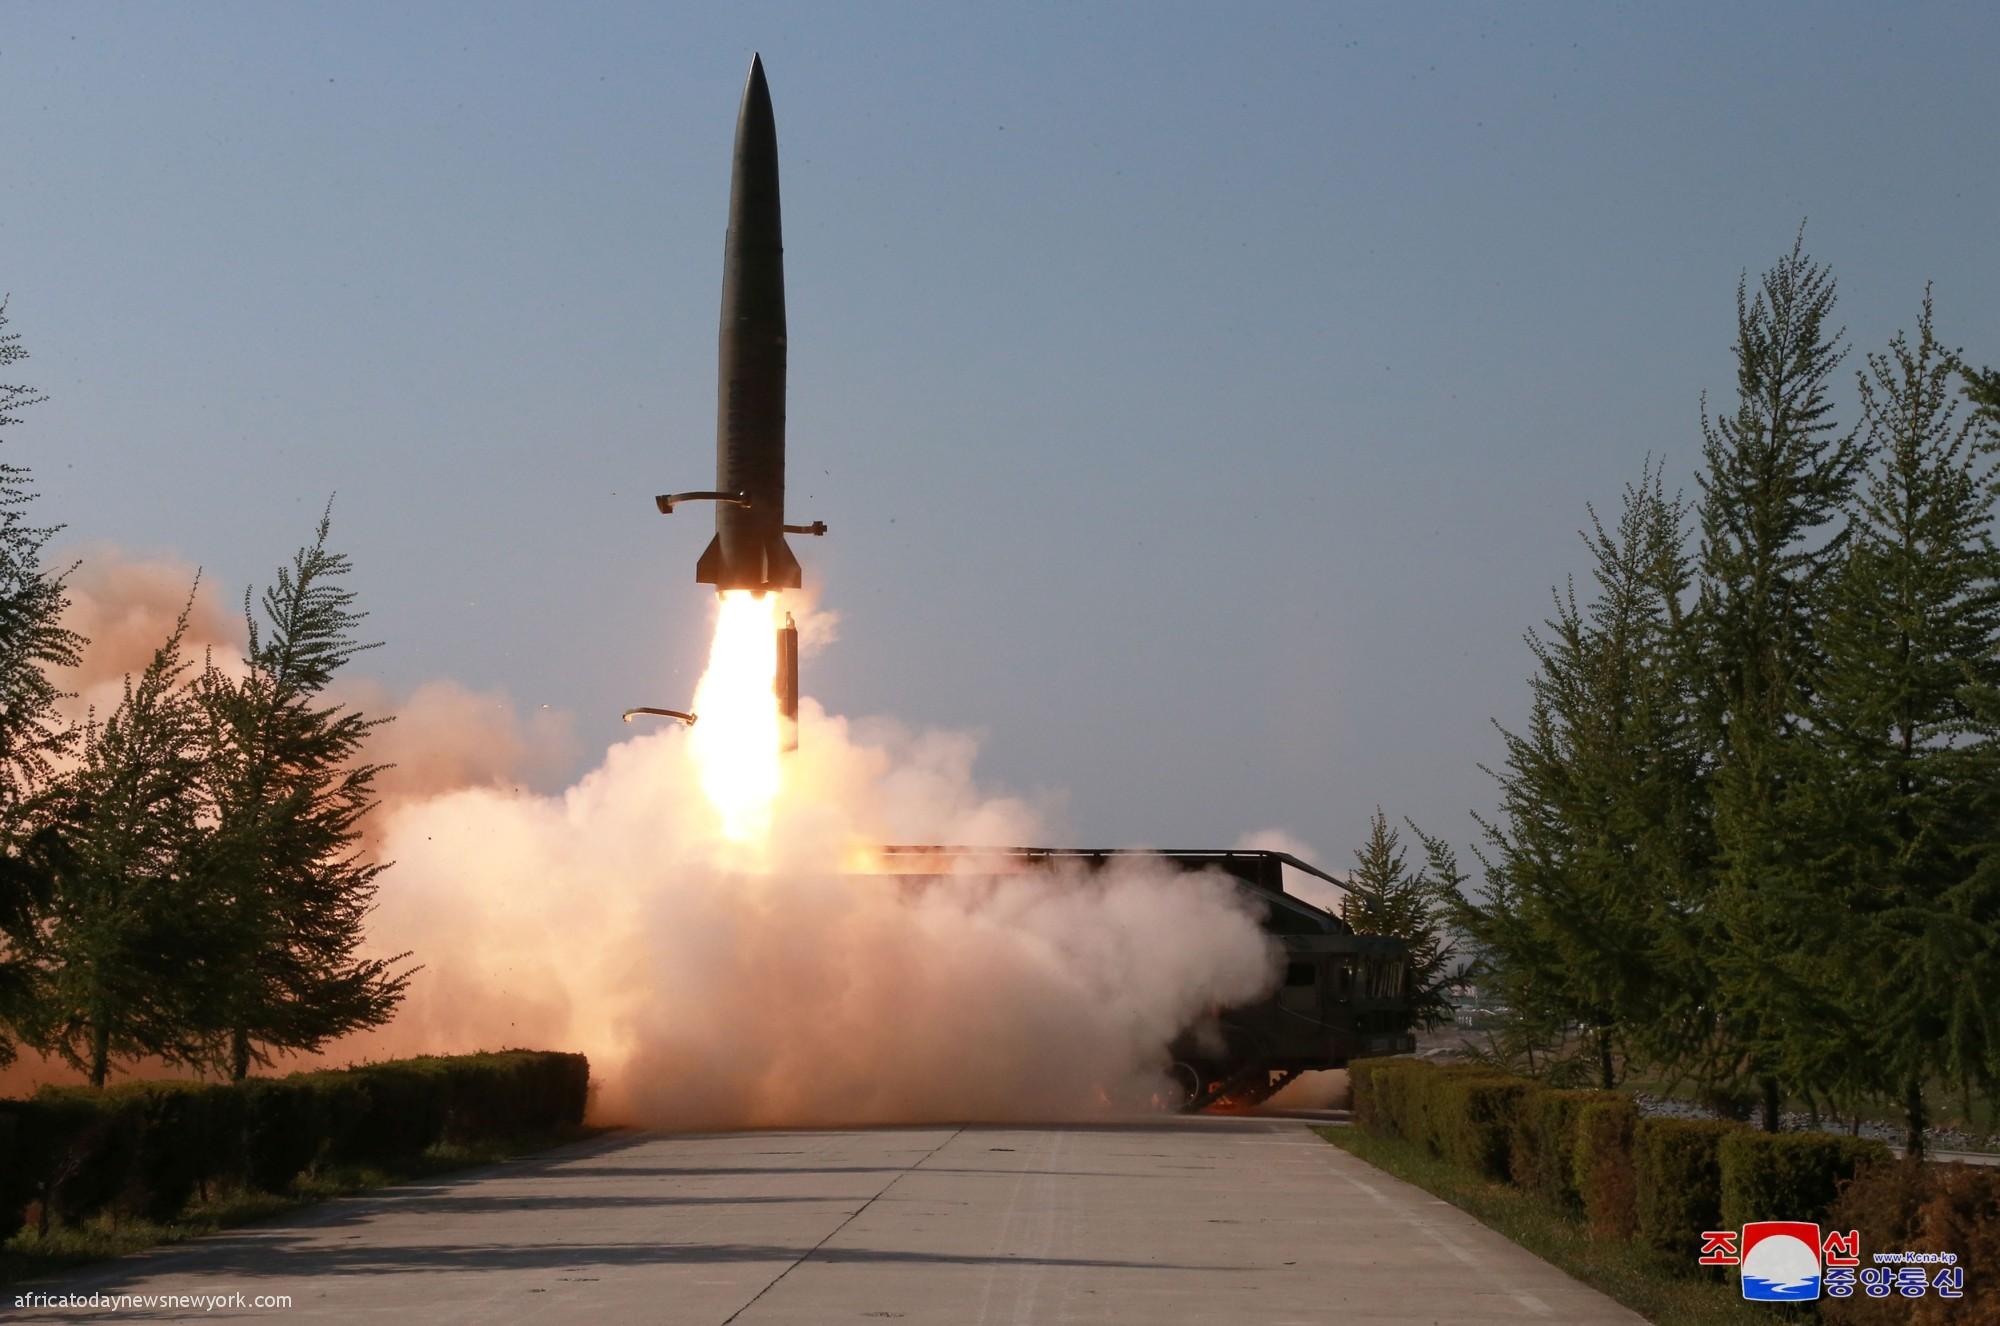 North Korea’s Missile Tests Cost Up To $650 Million - Report